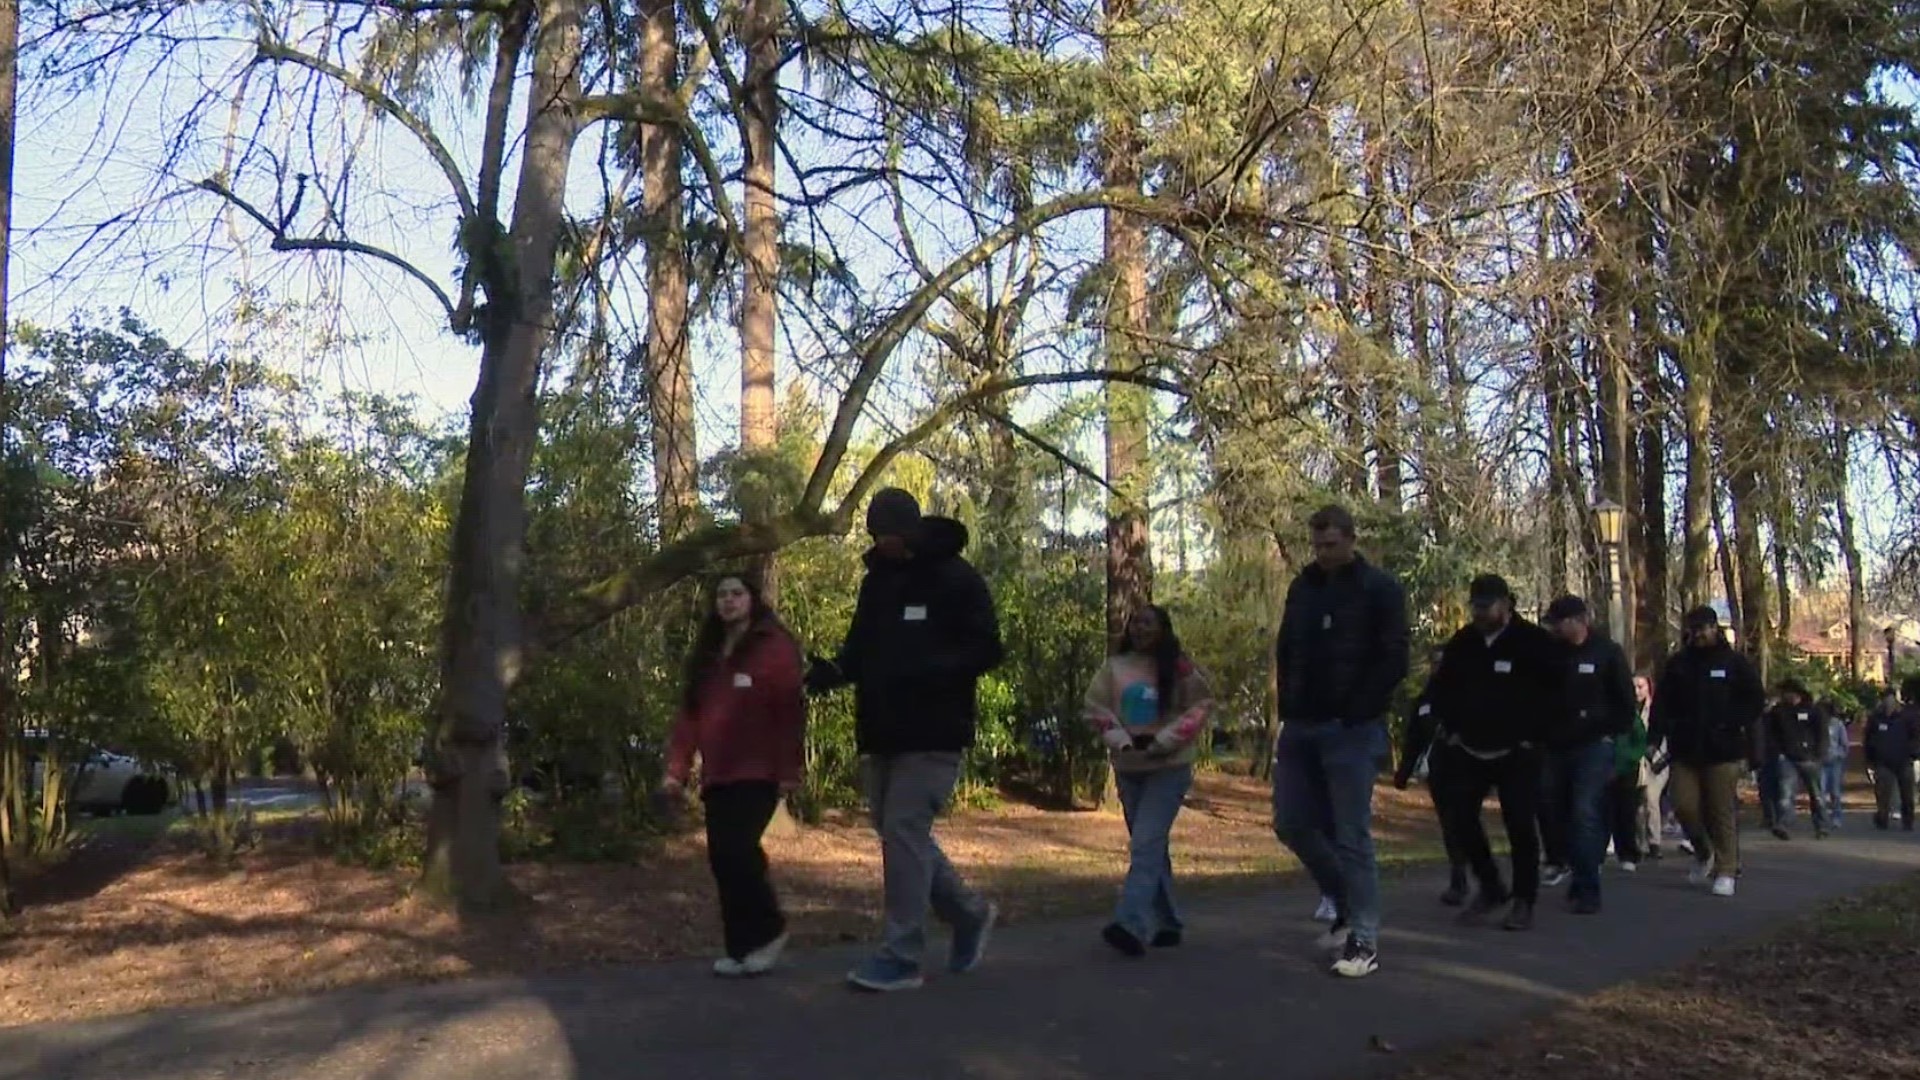 "Talk a Mile" pairs young Black community leaders with Portland police officers and trainees. They walk a mile together and talk, with the goal to build trust.